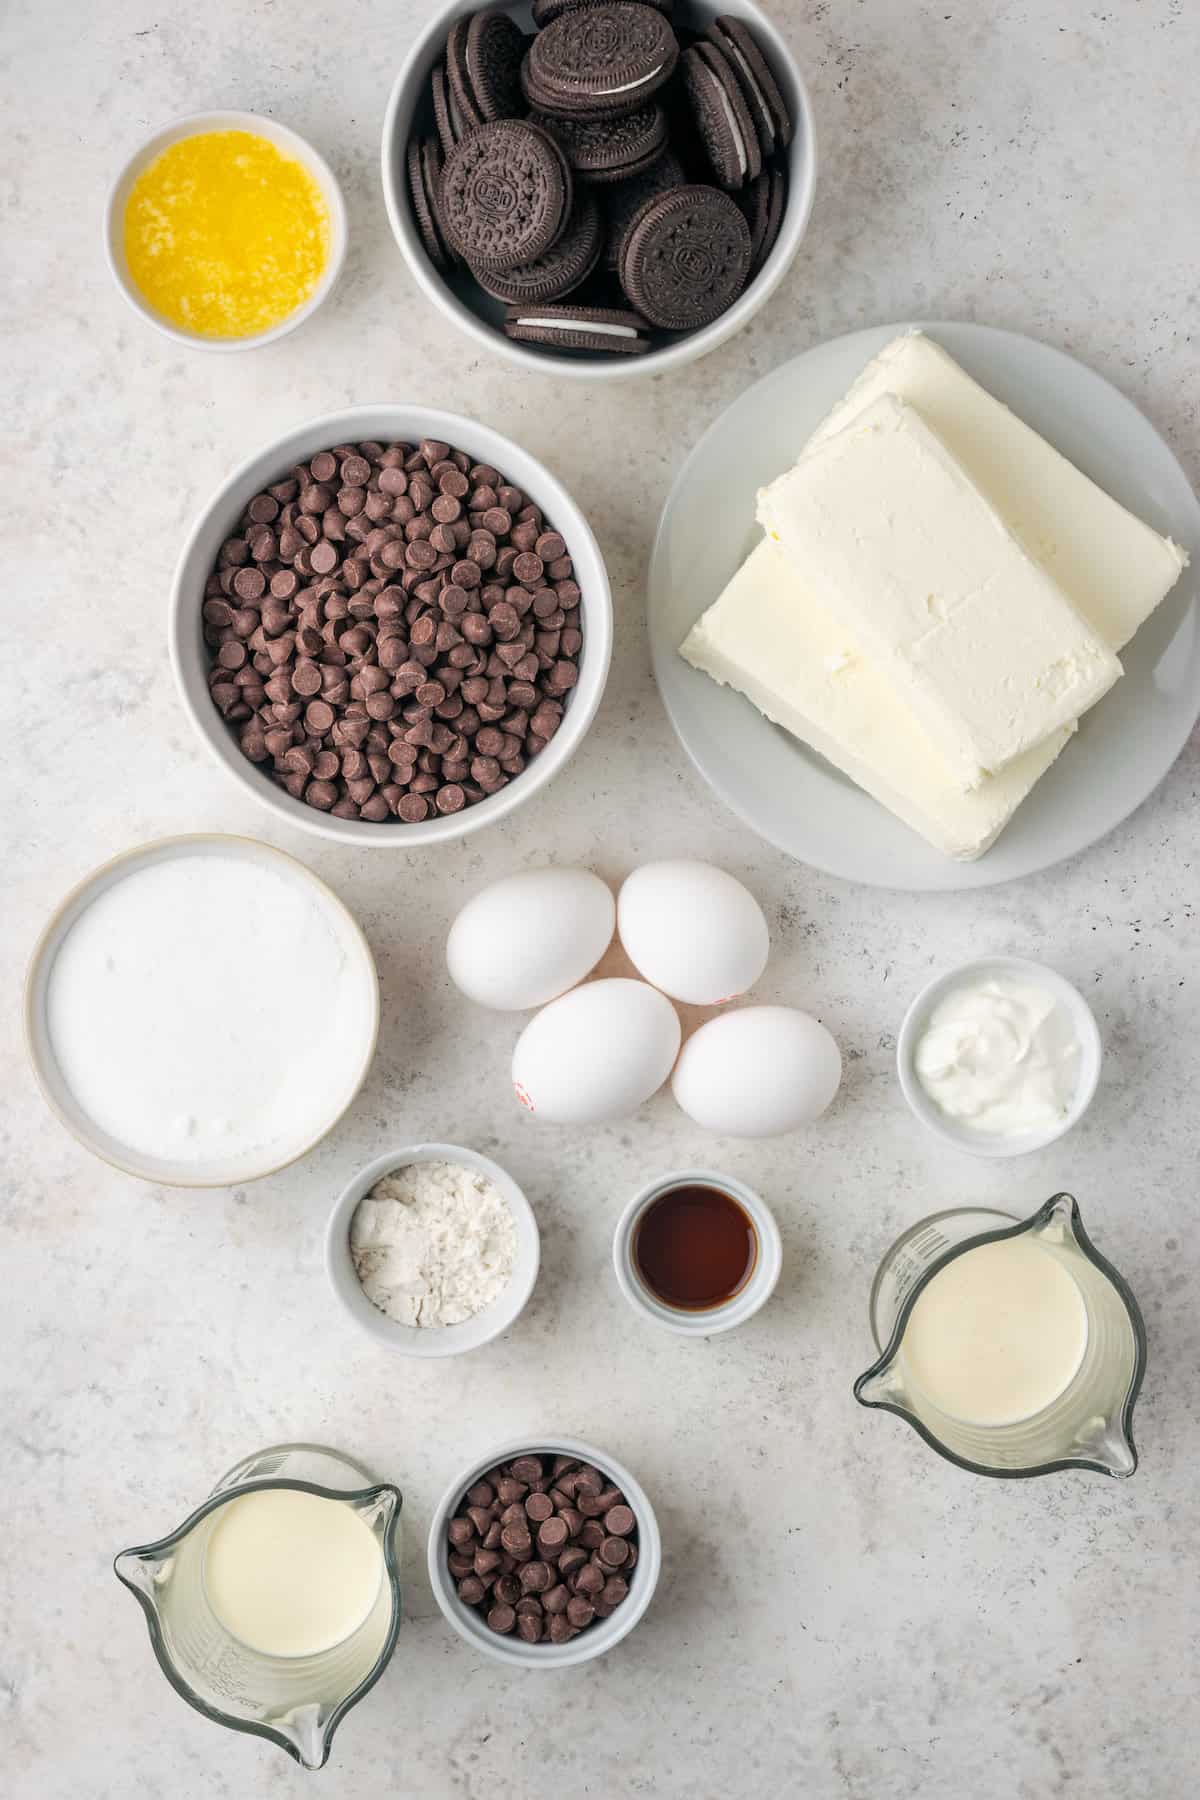 Ingredients needed to make chocolate cheesecake are shown on a white background, including eggs, chocolate chips, cream, cream cheese, vanilla, and gluten free flour.